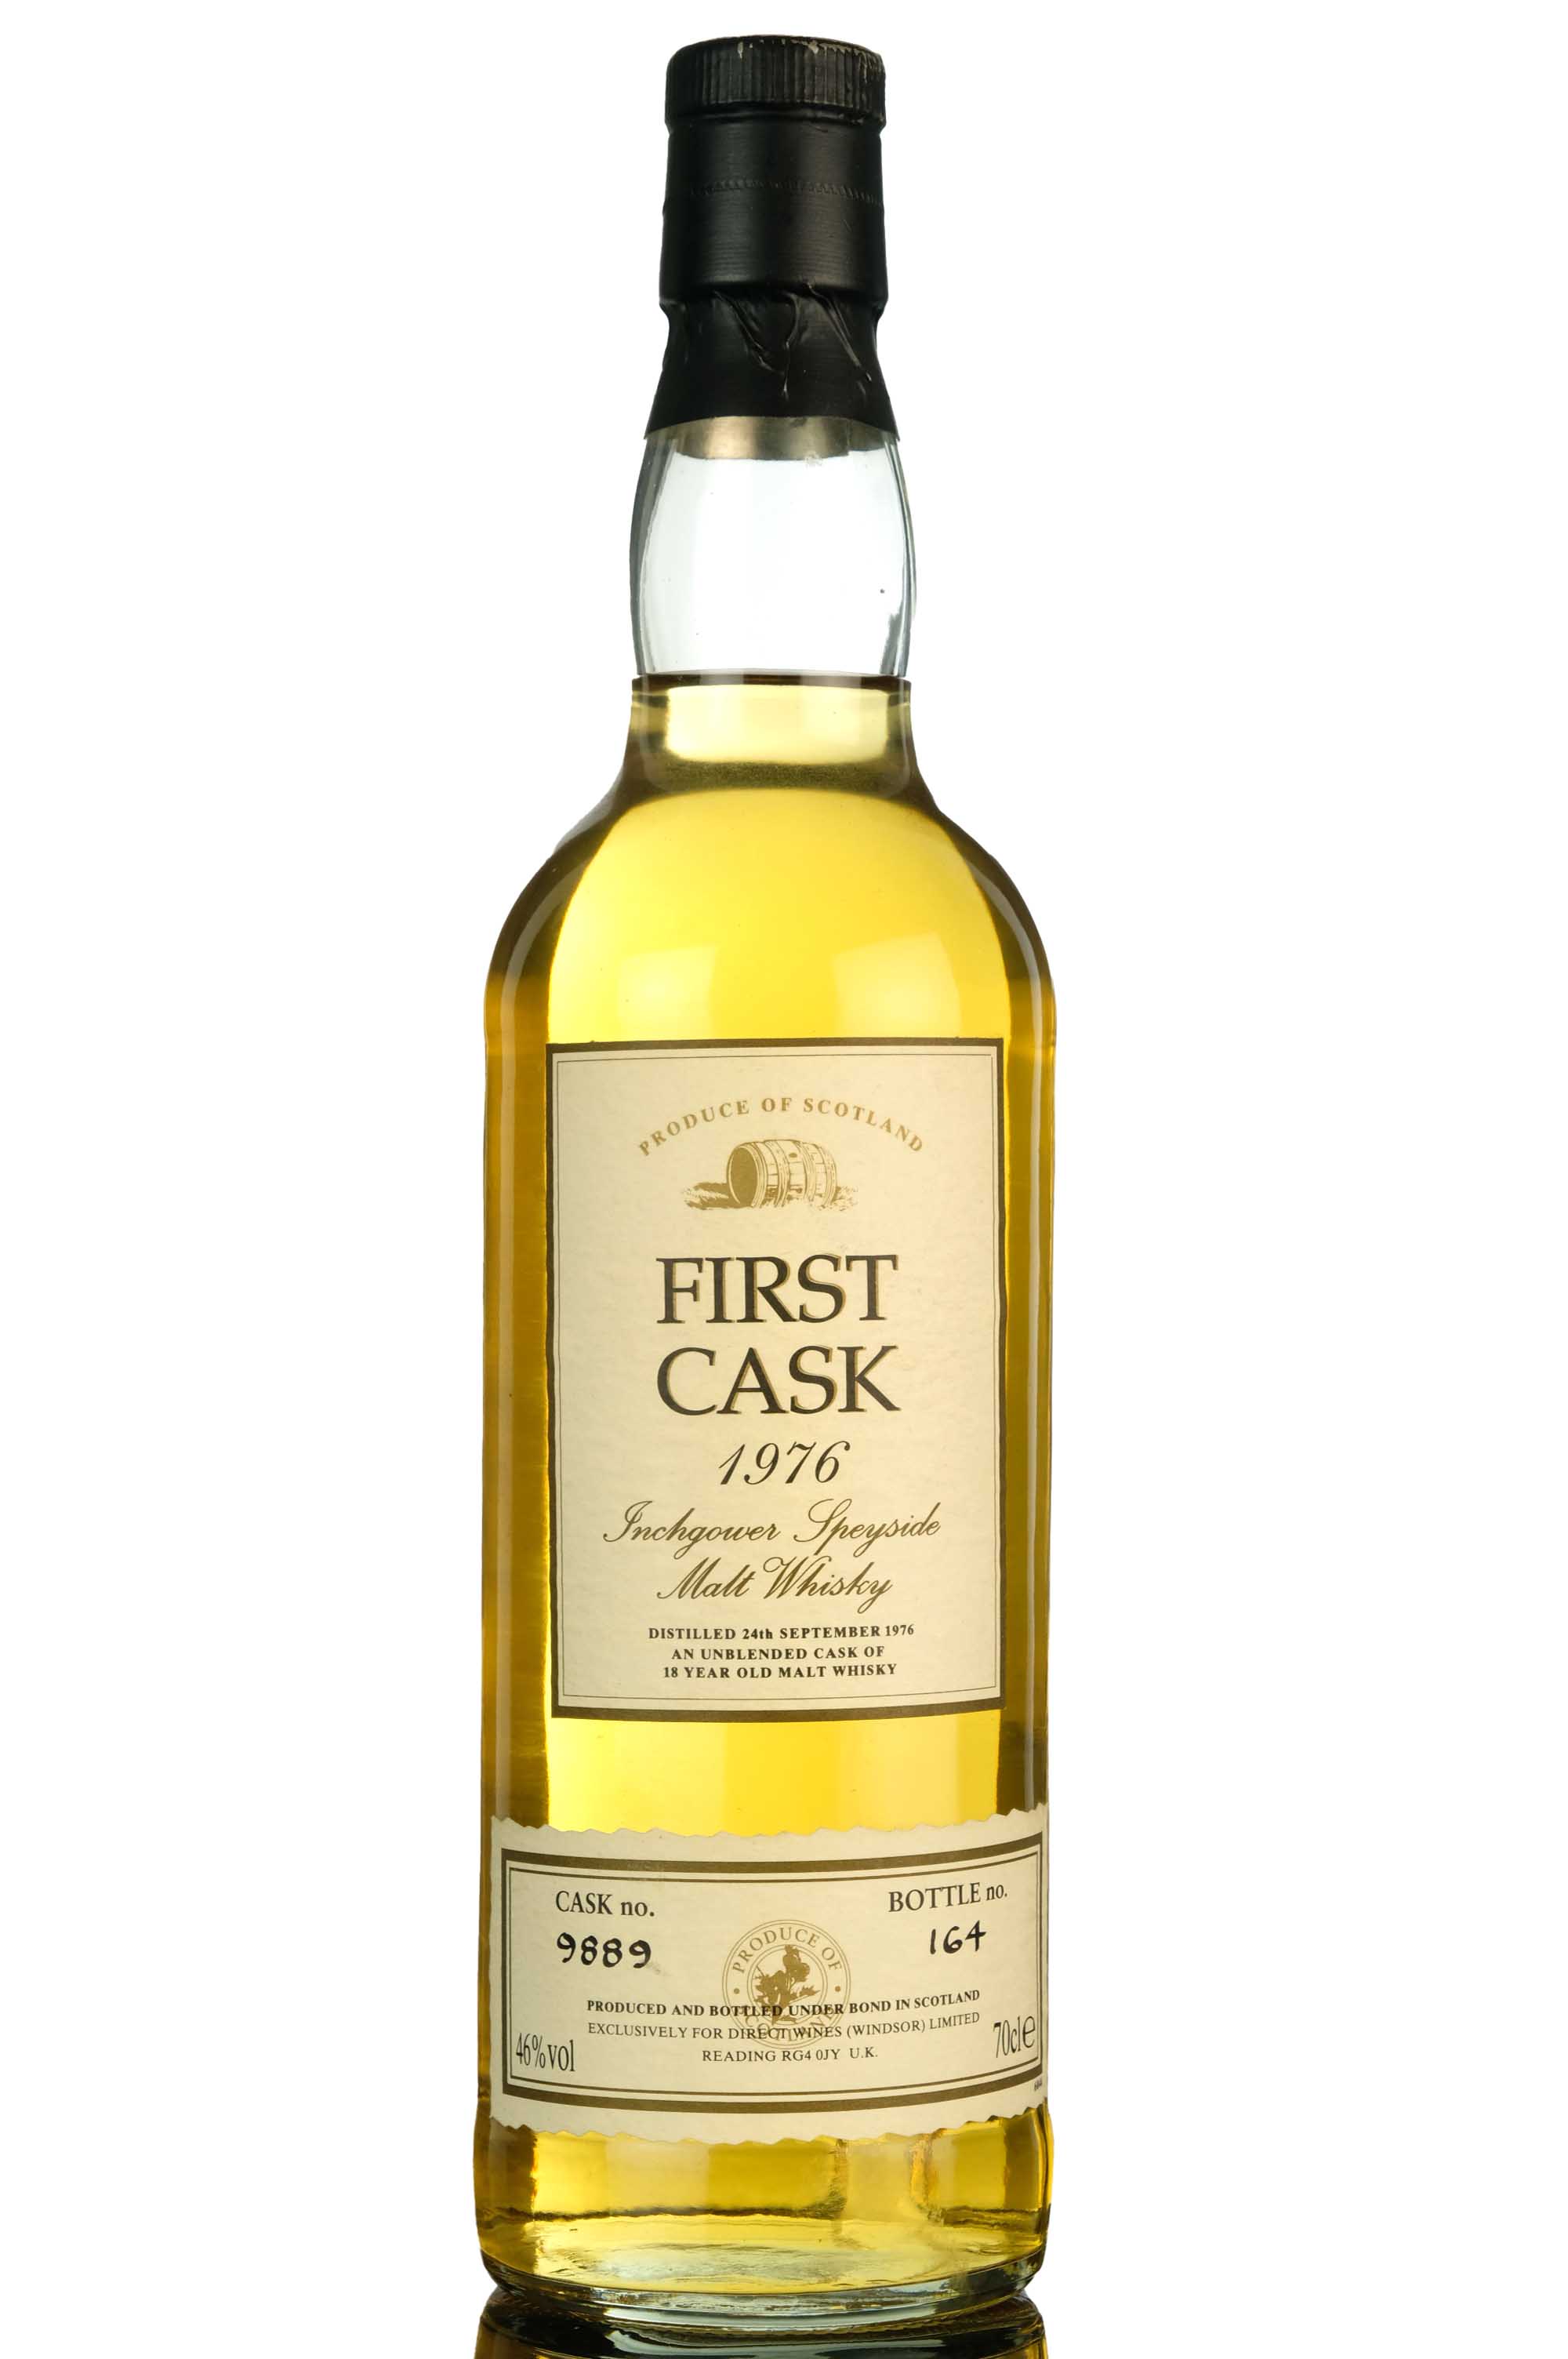 Inchgower 1976 - 18 Year Old - First Cask - Single Cask 9889